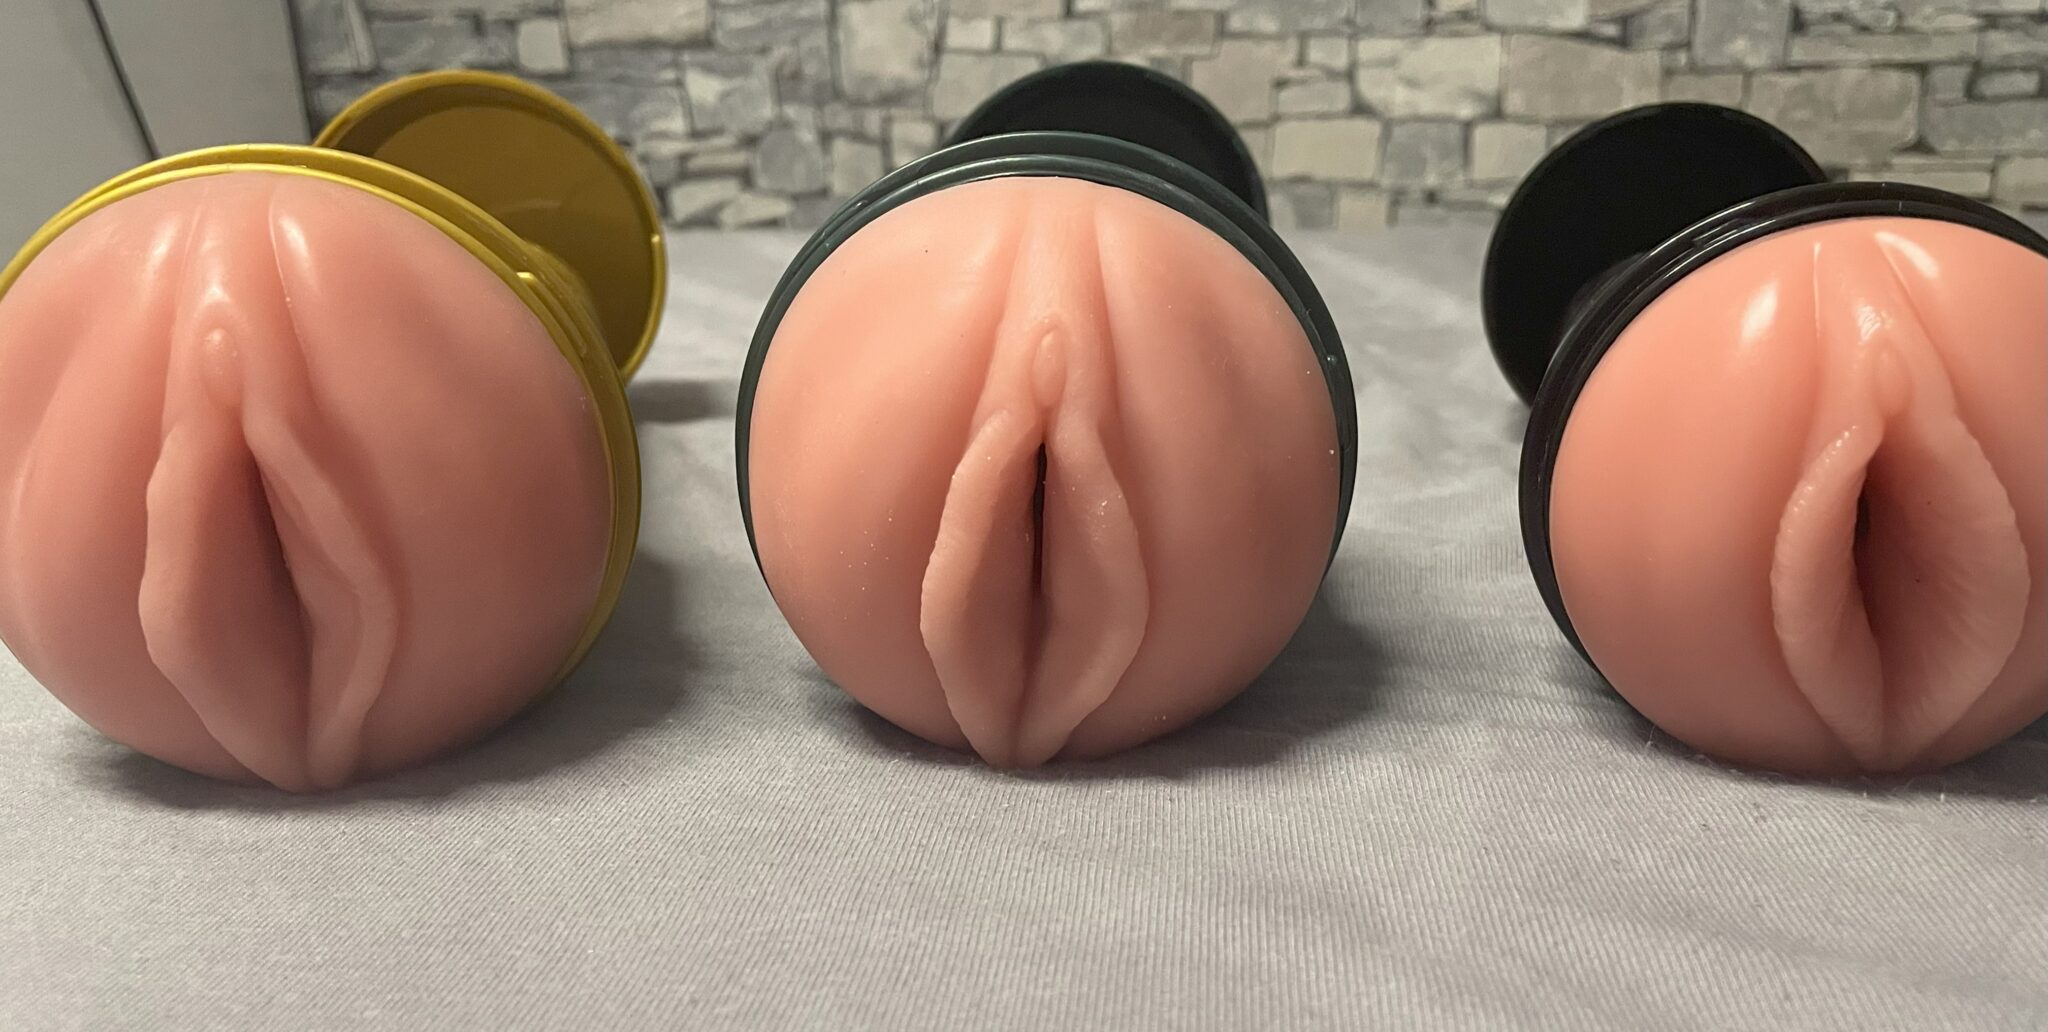 My Personal Experiences with Fleshlight Vibro